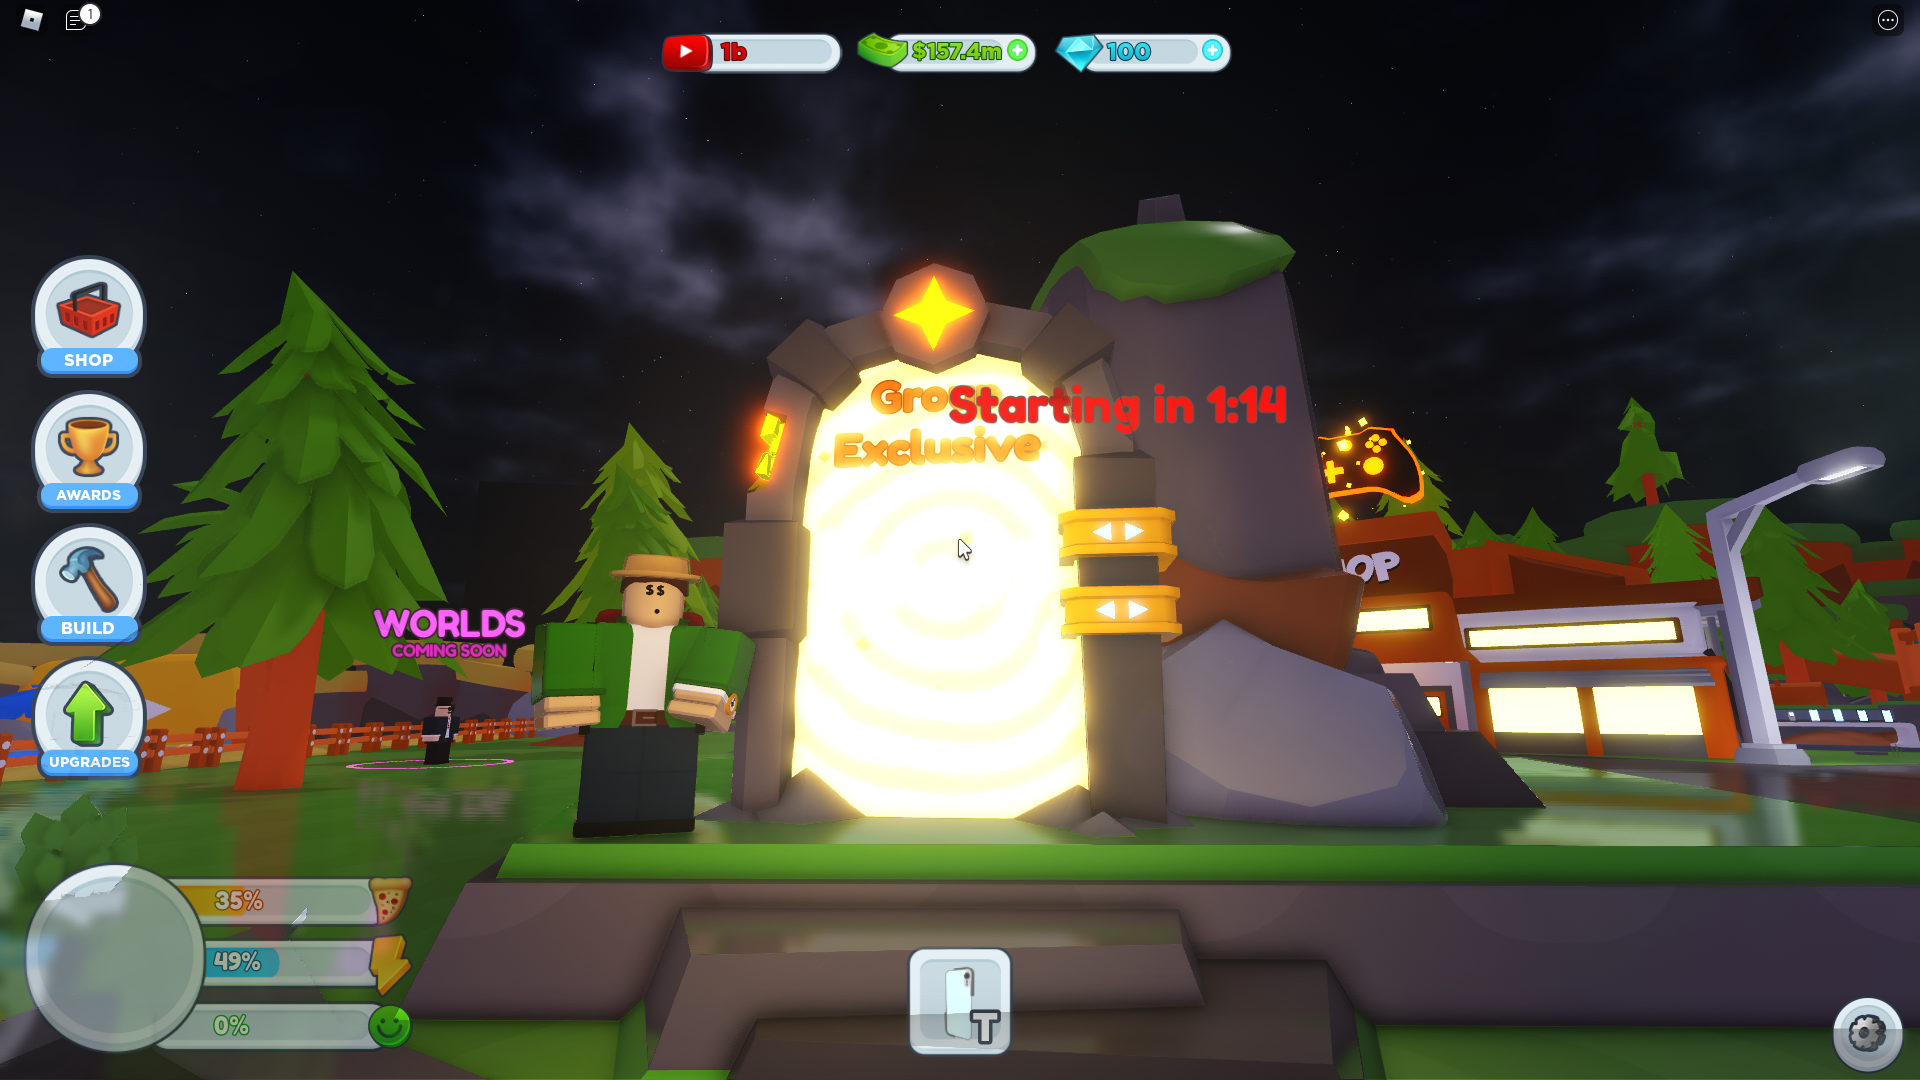 The group,  Life (Roblox) Wiki